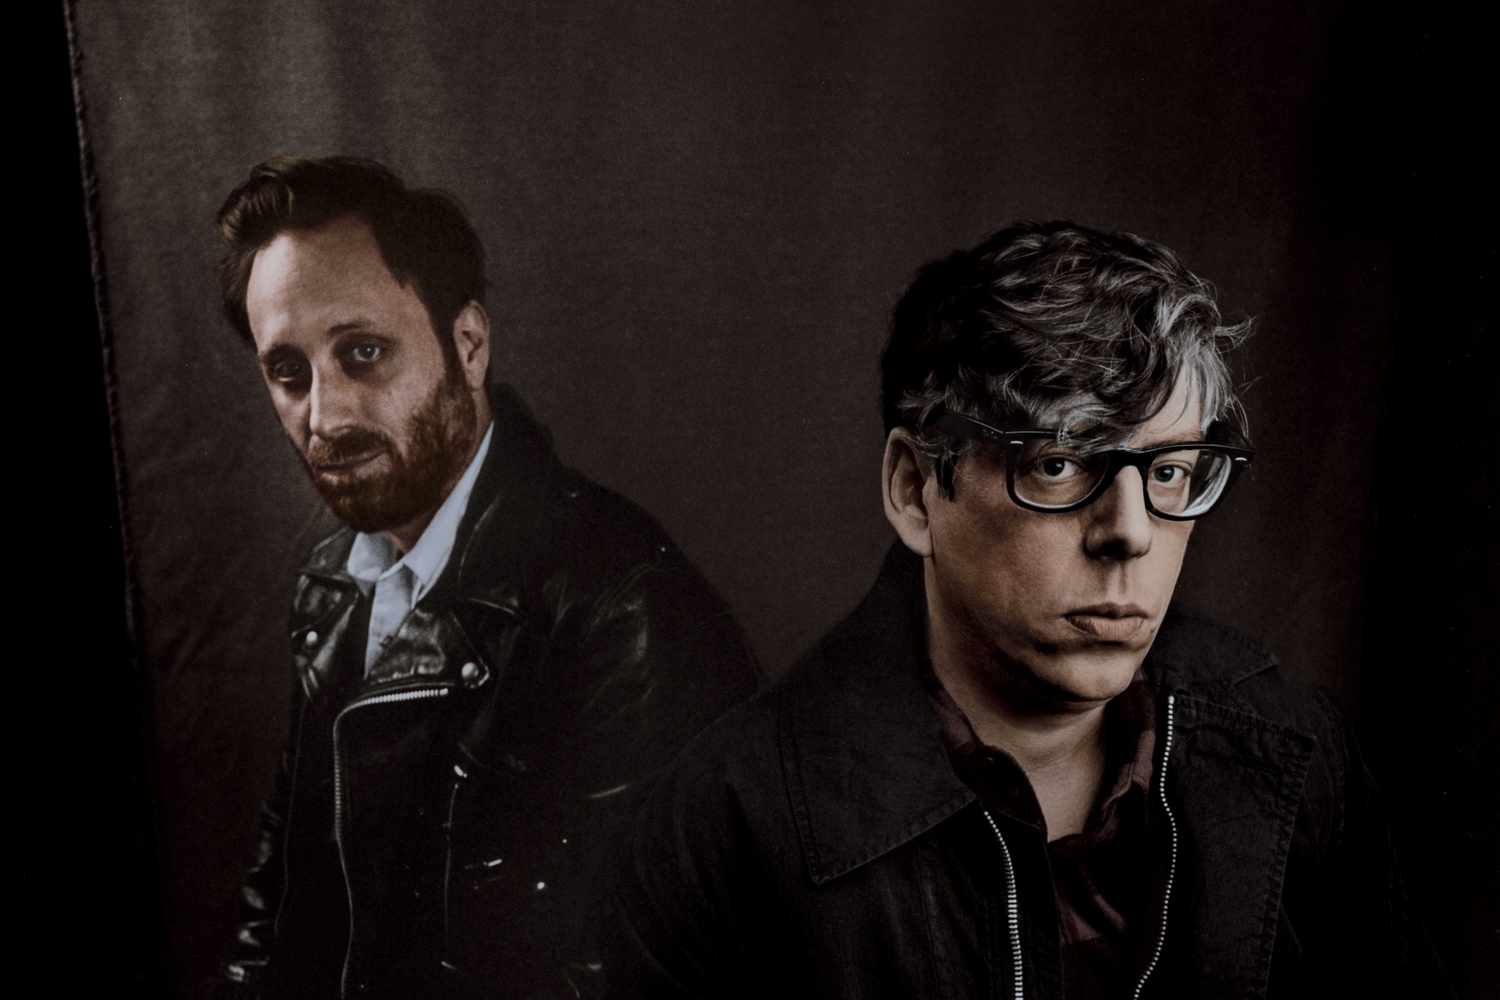 The Black Keys return after 5 years with ‘Lo/Hi’